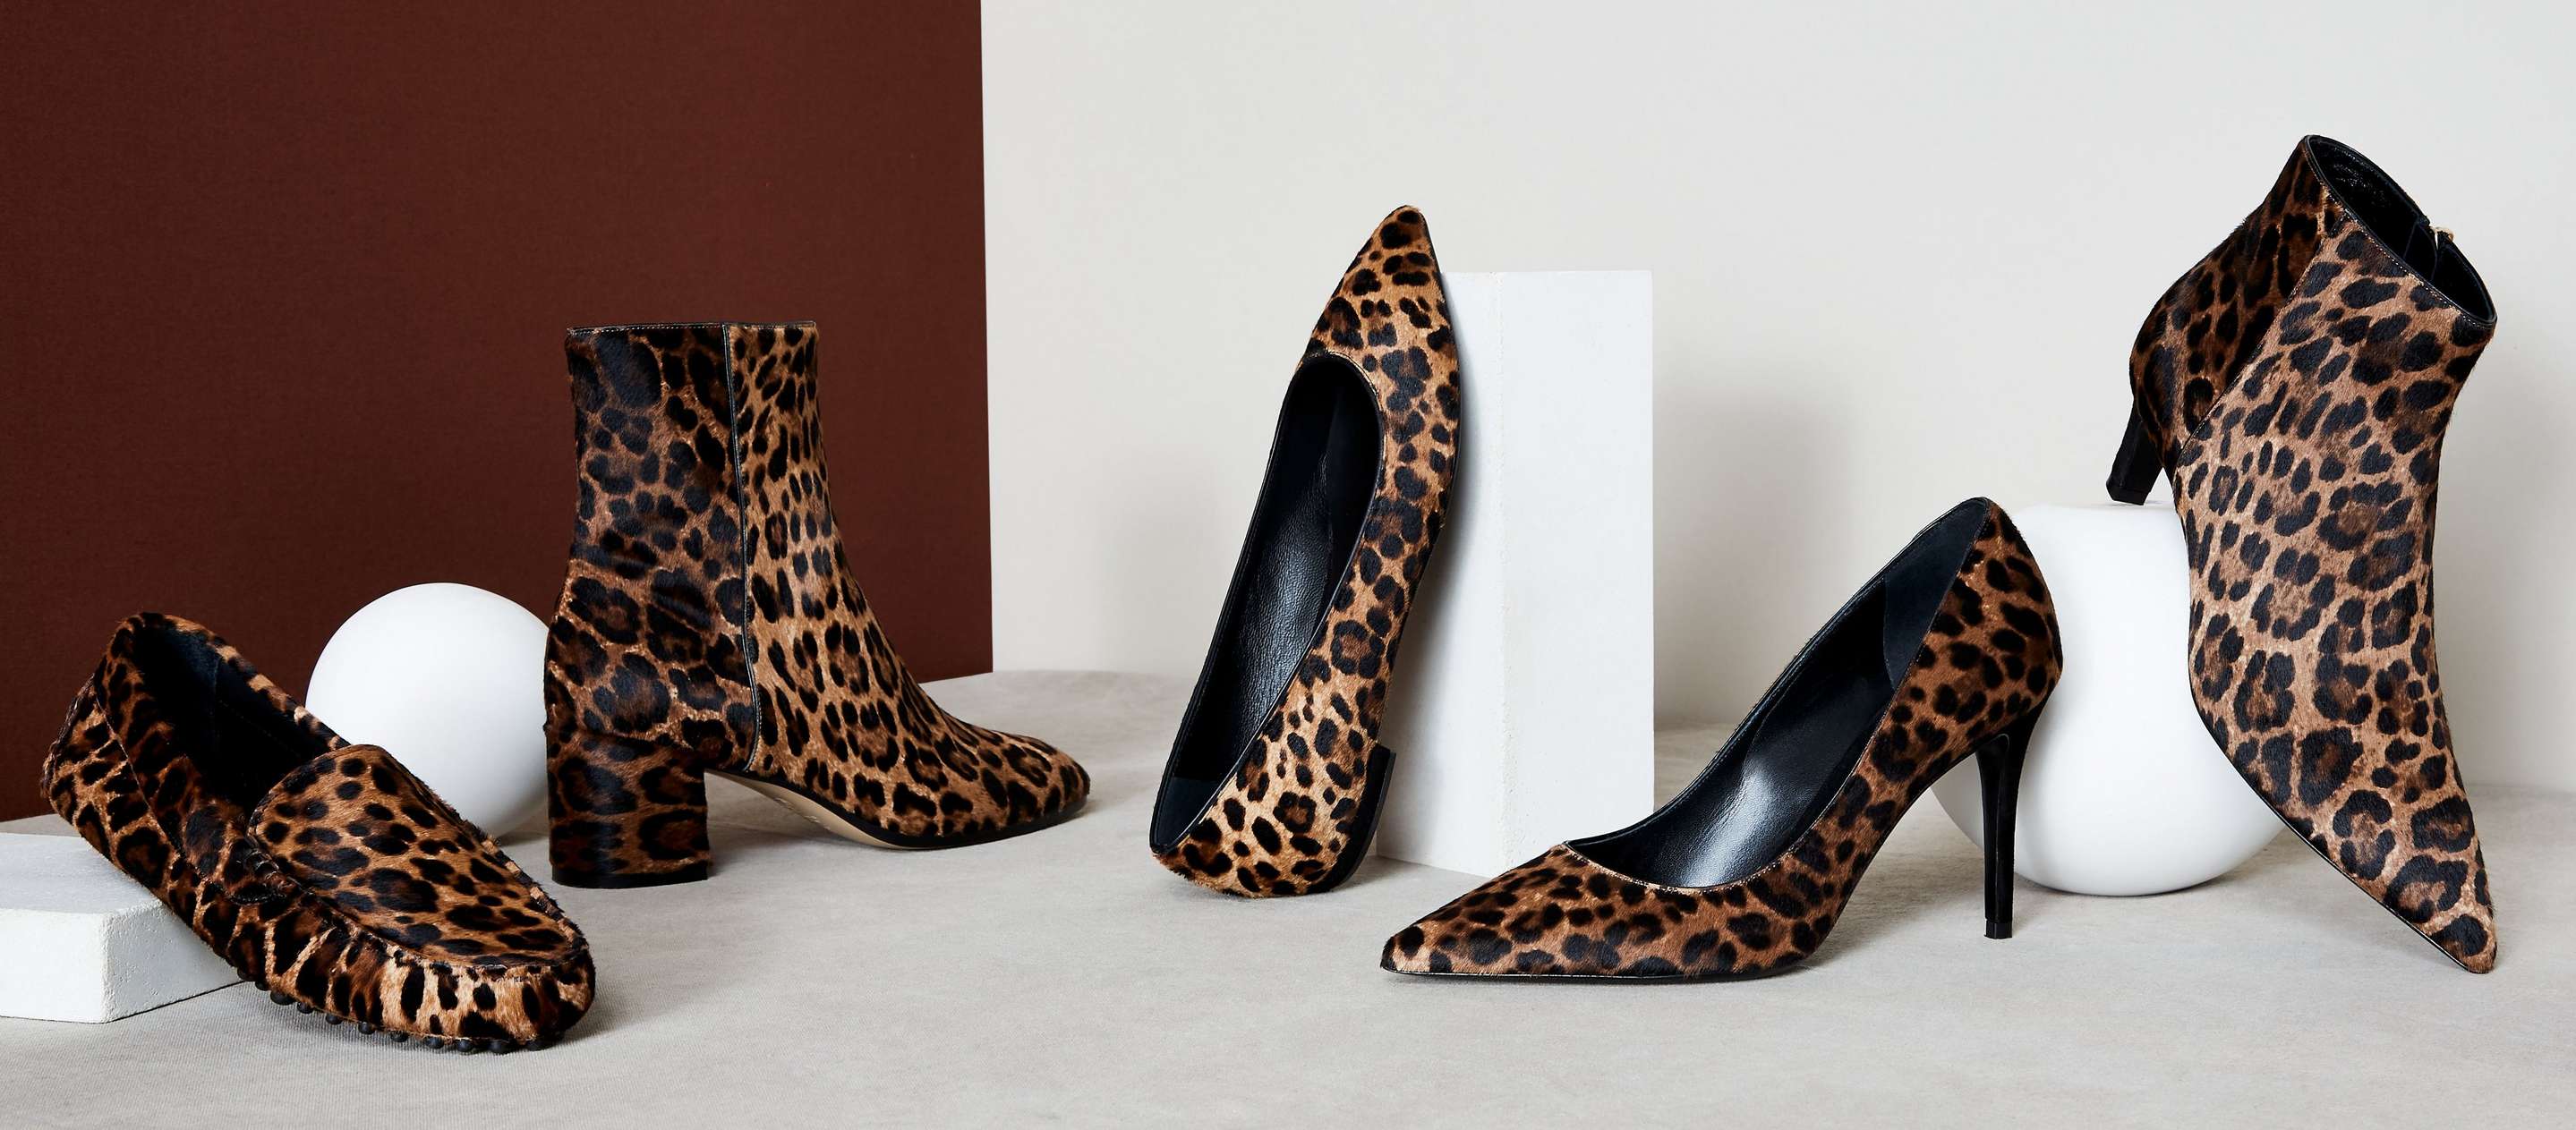 animal print shoes this fall winter 2018 - leopard print shoes